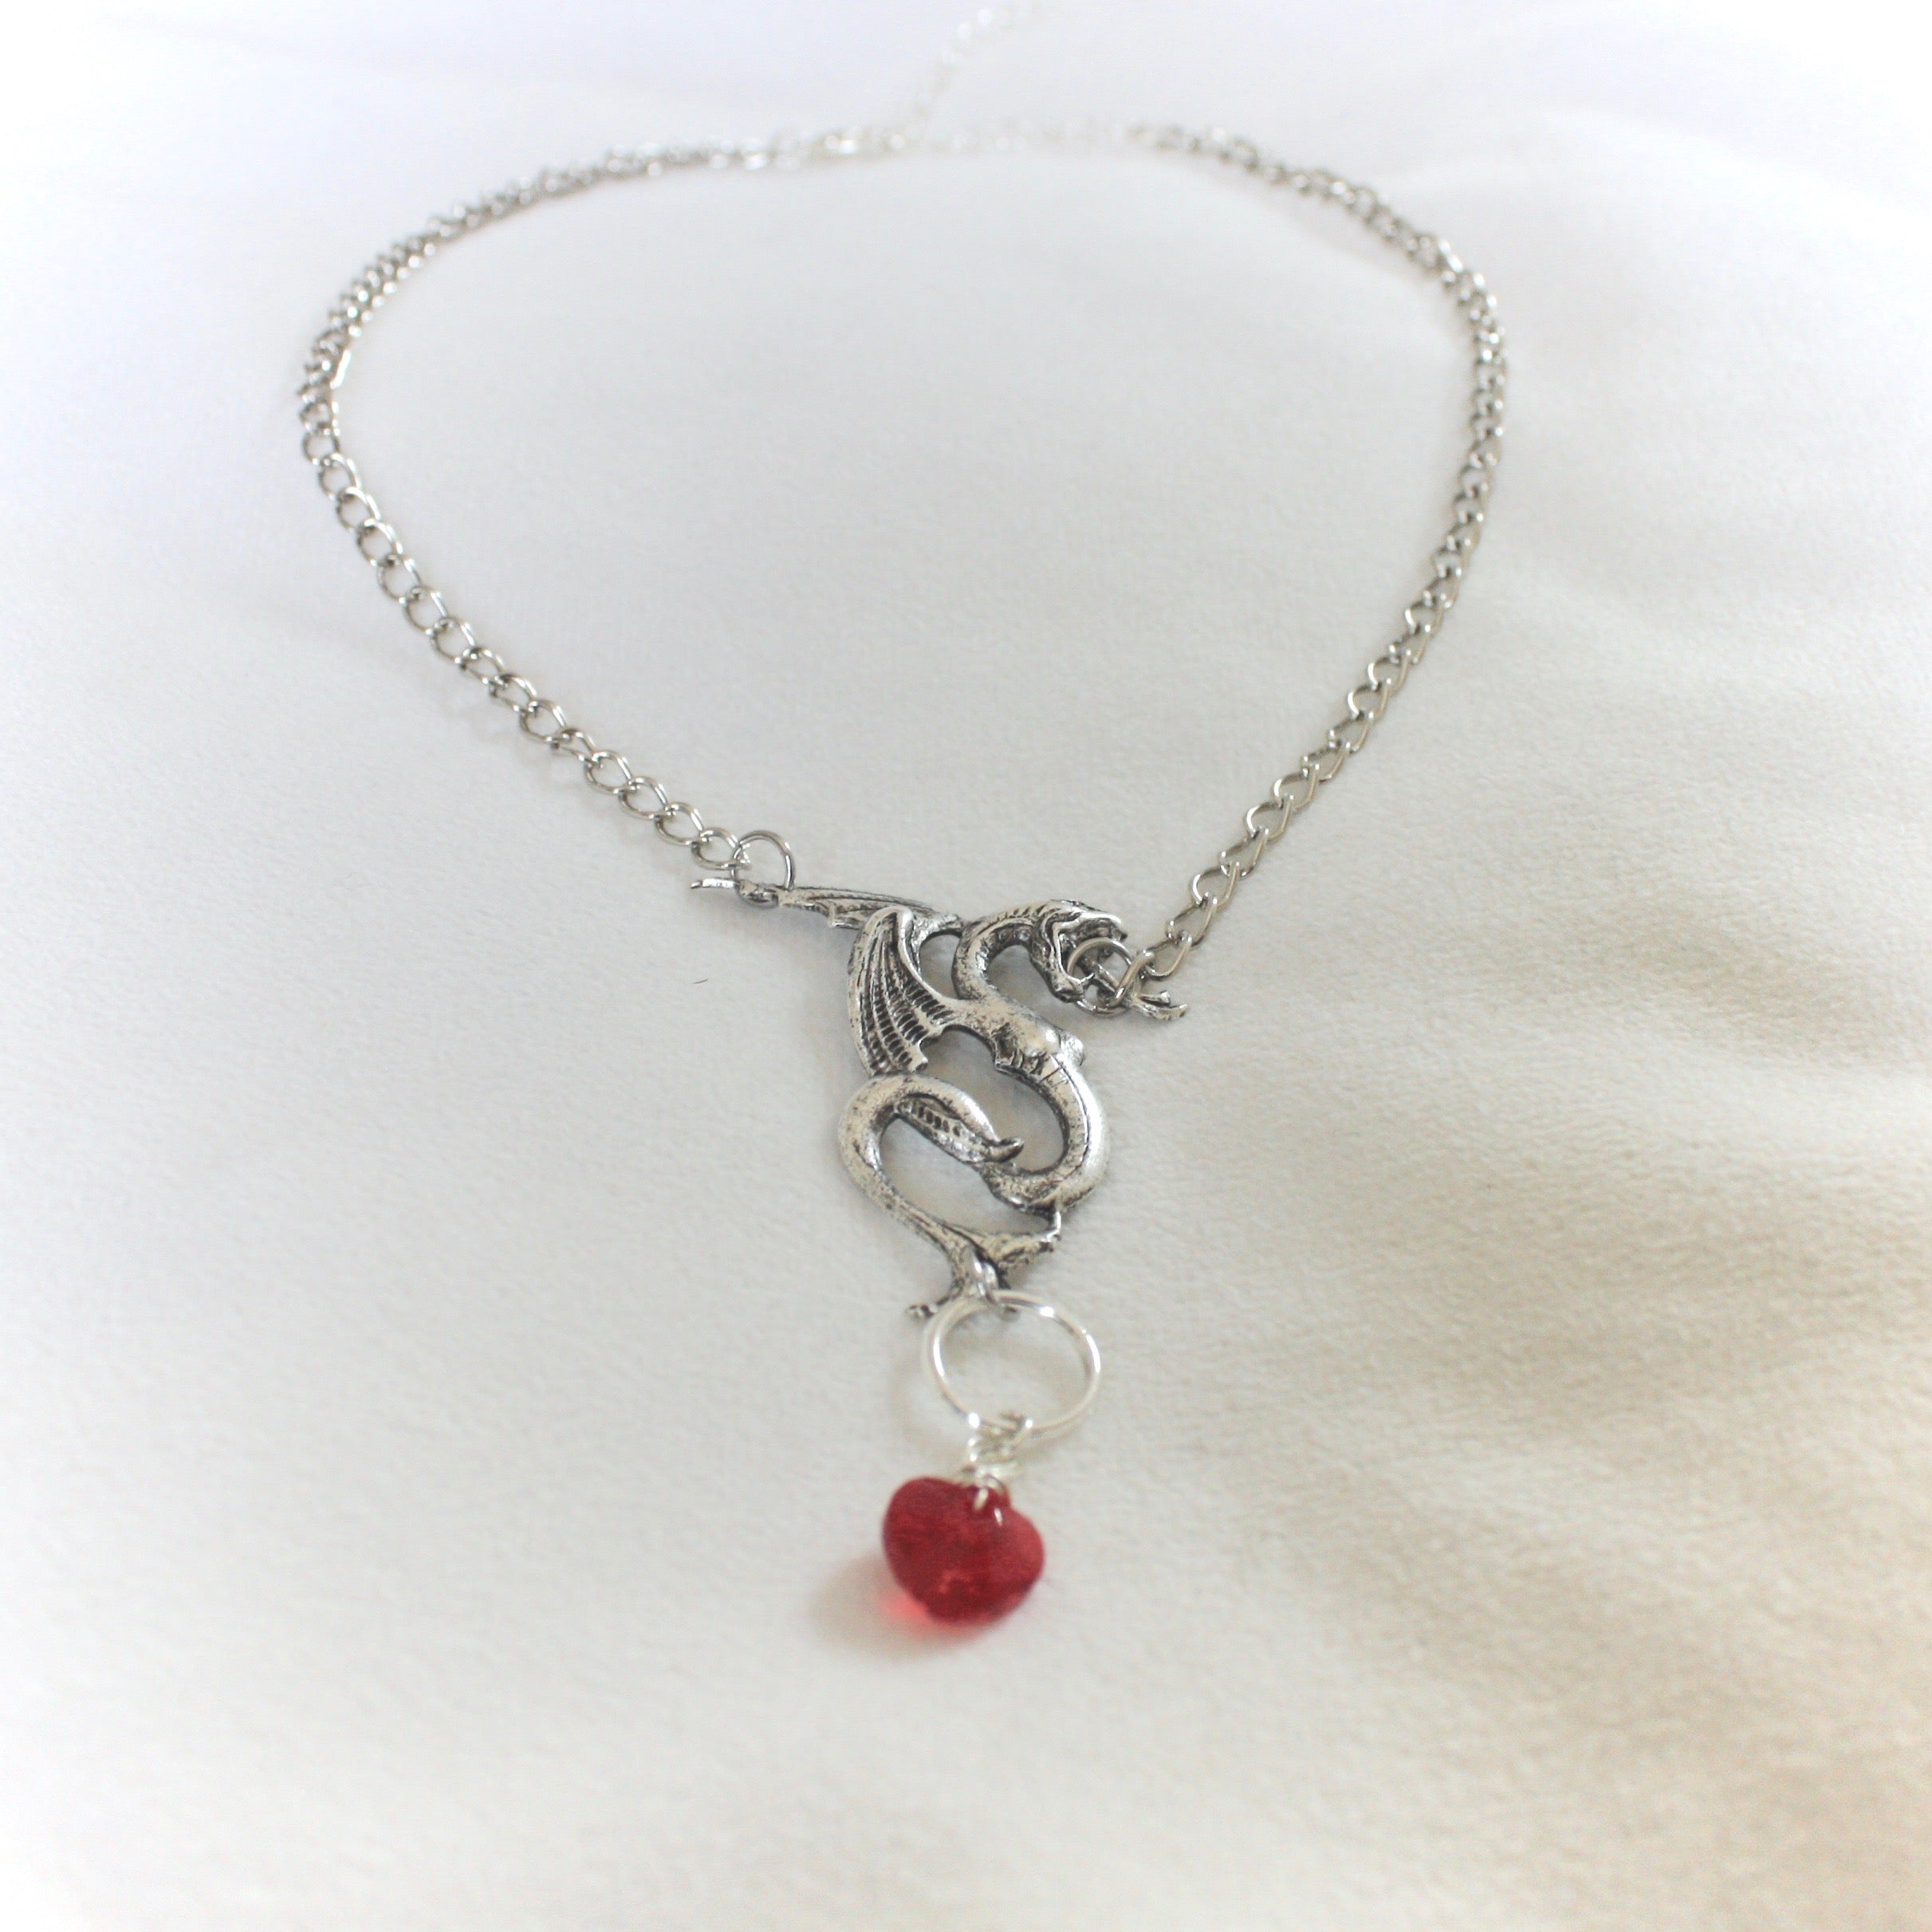 The Otherworldly Necklace in Crystal Heart